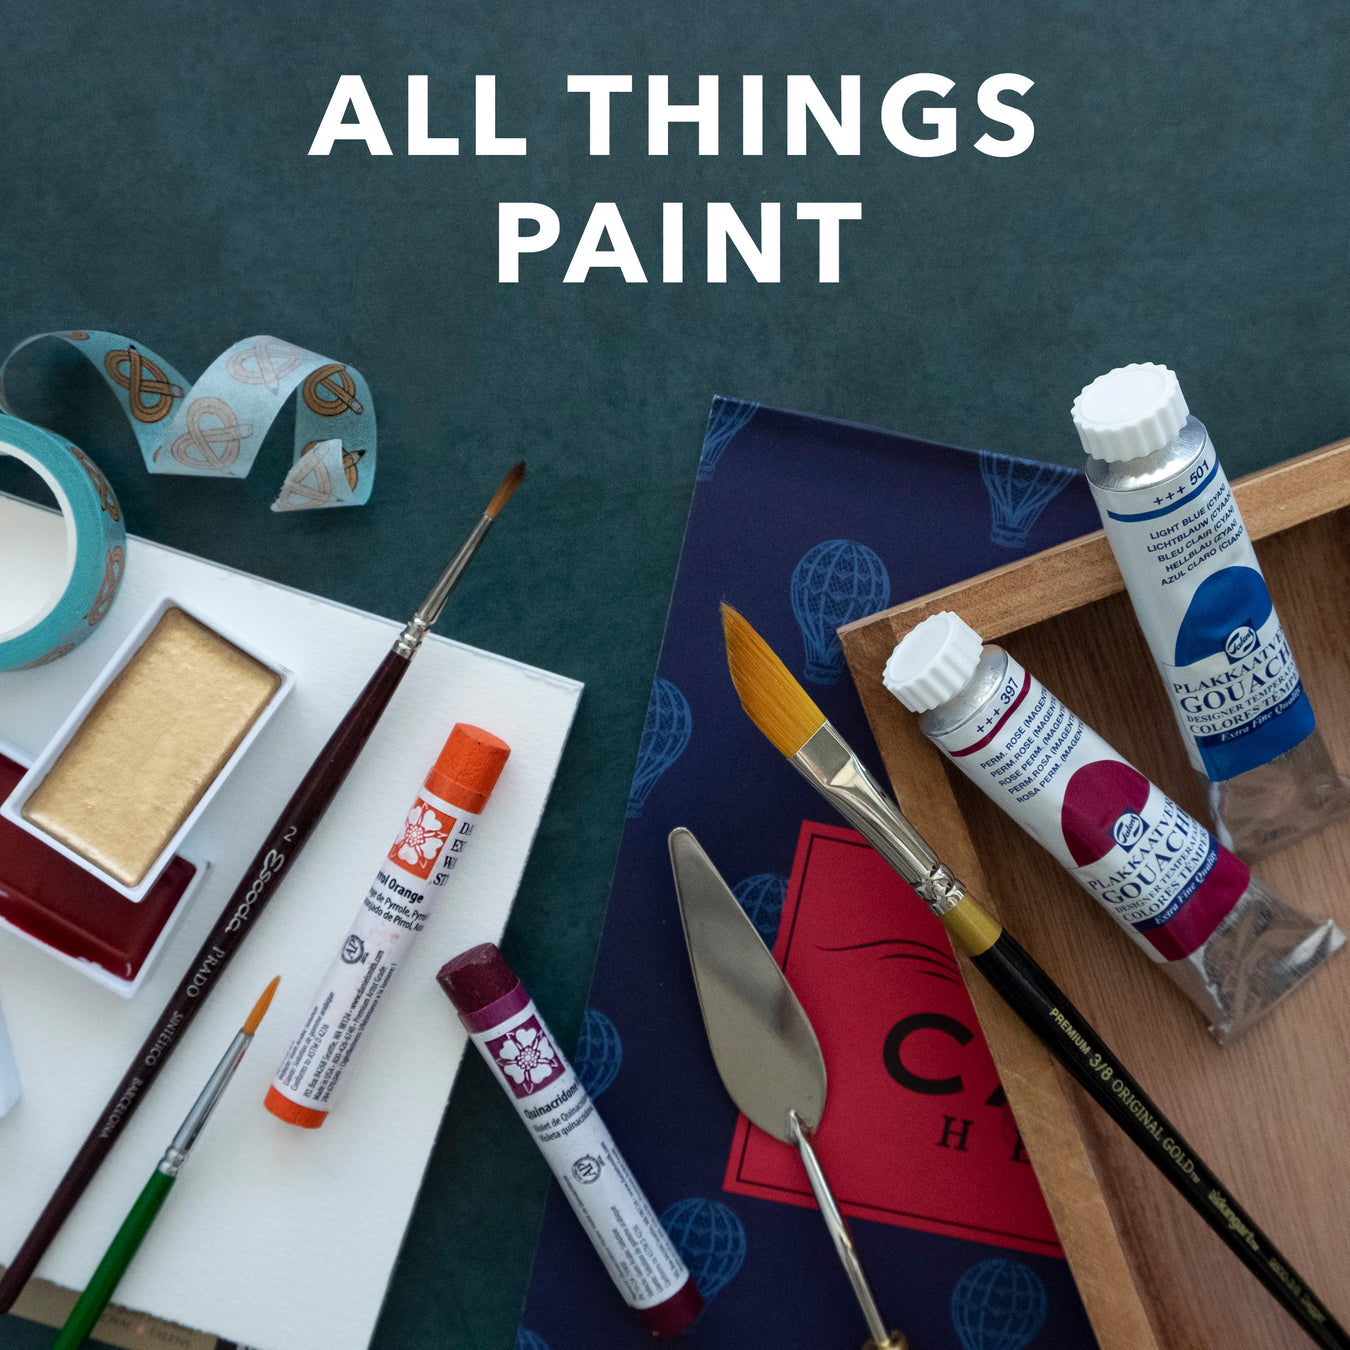 All Things Paint